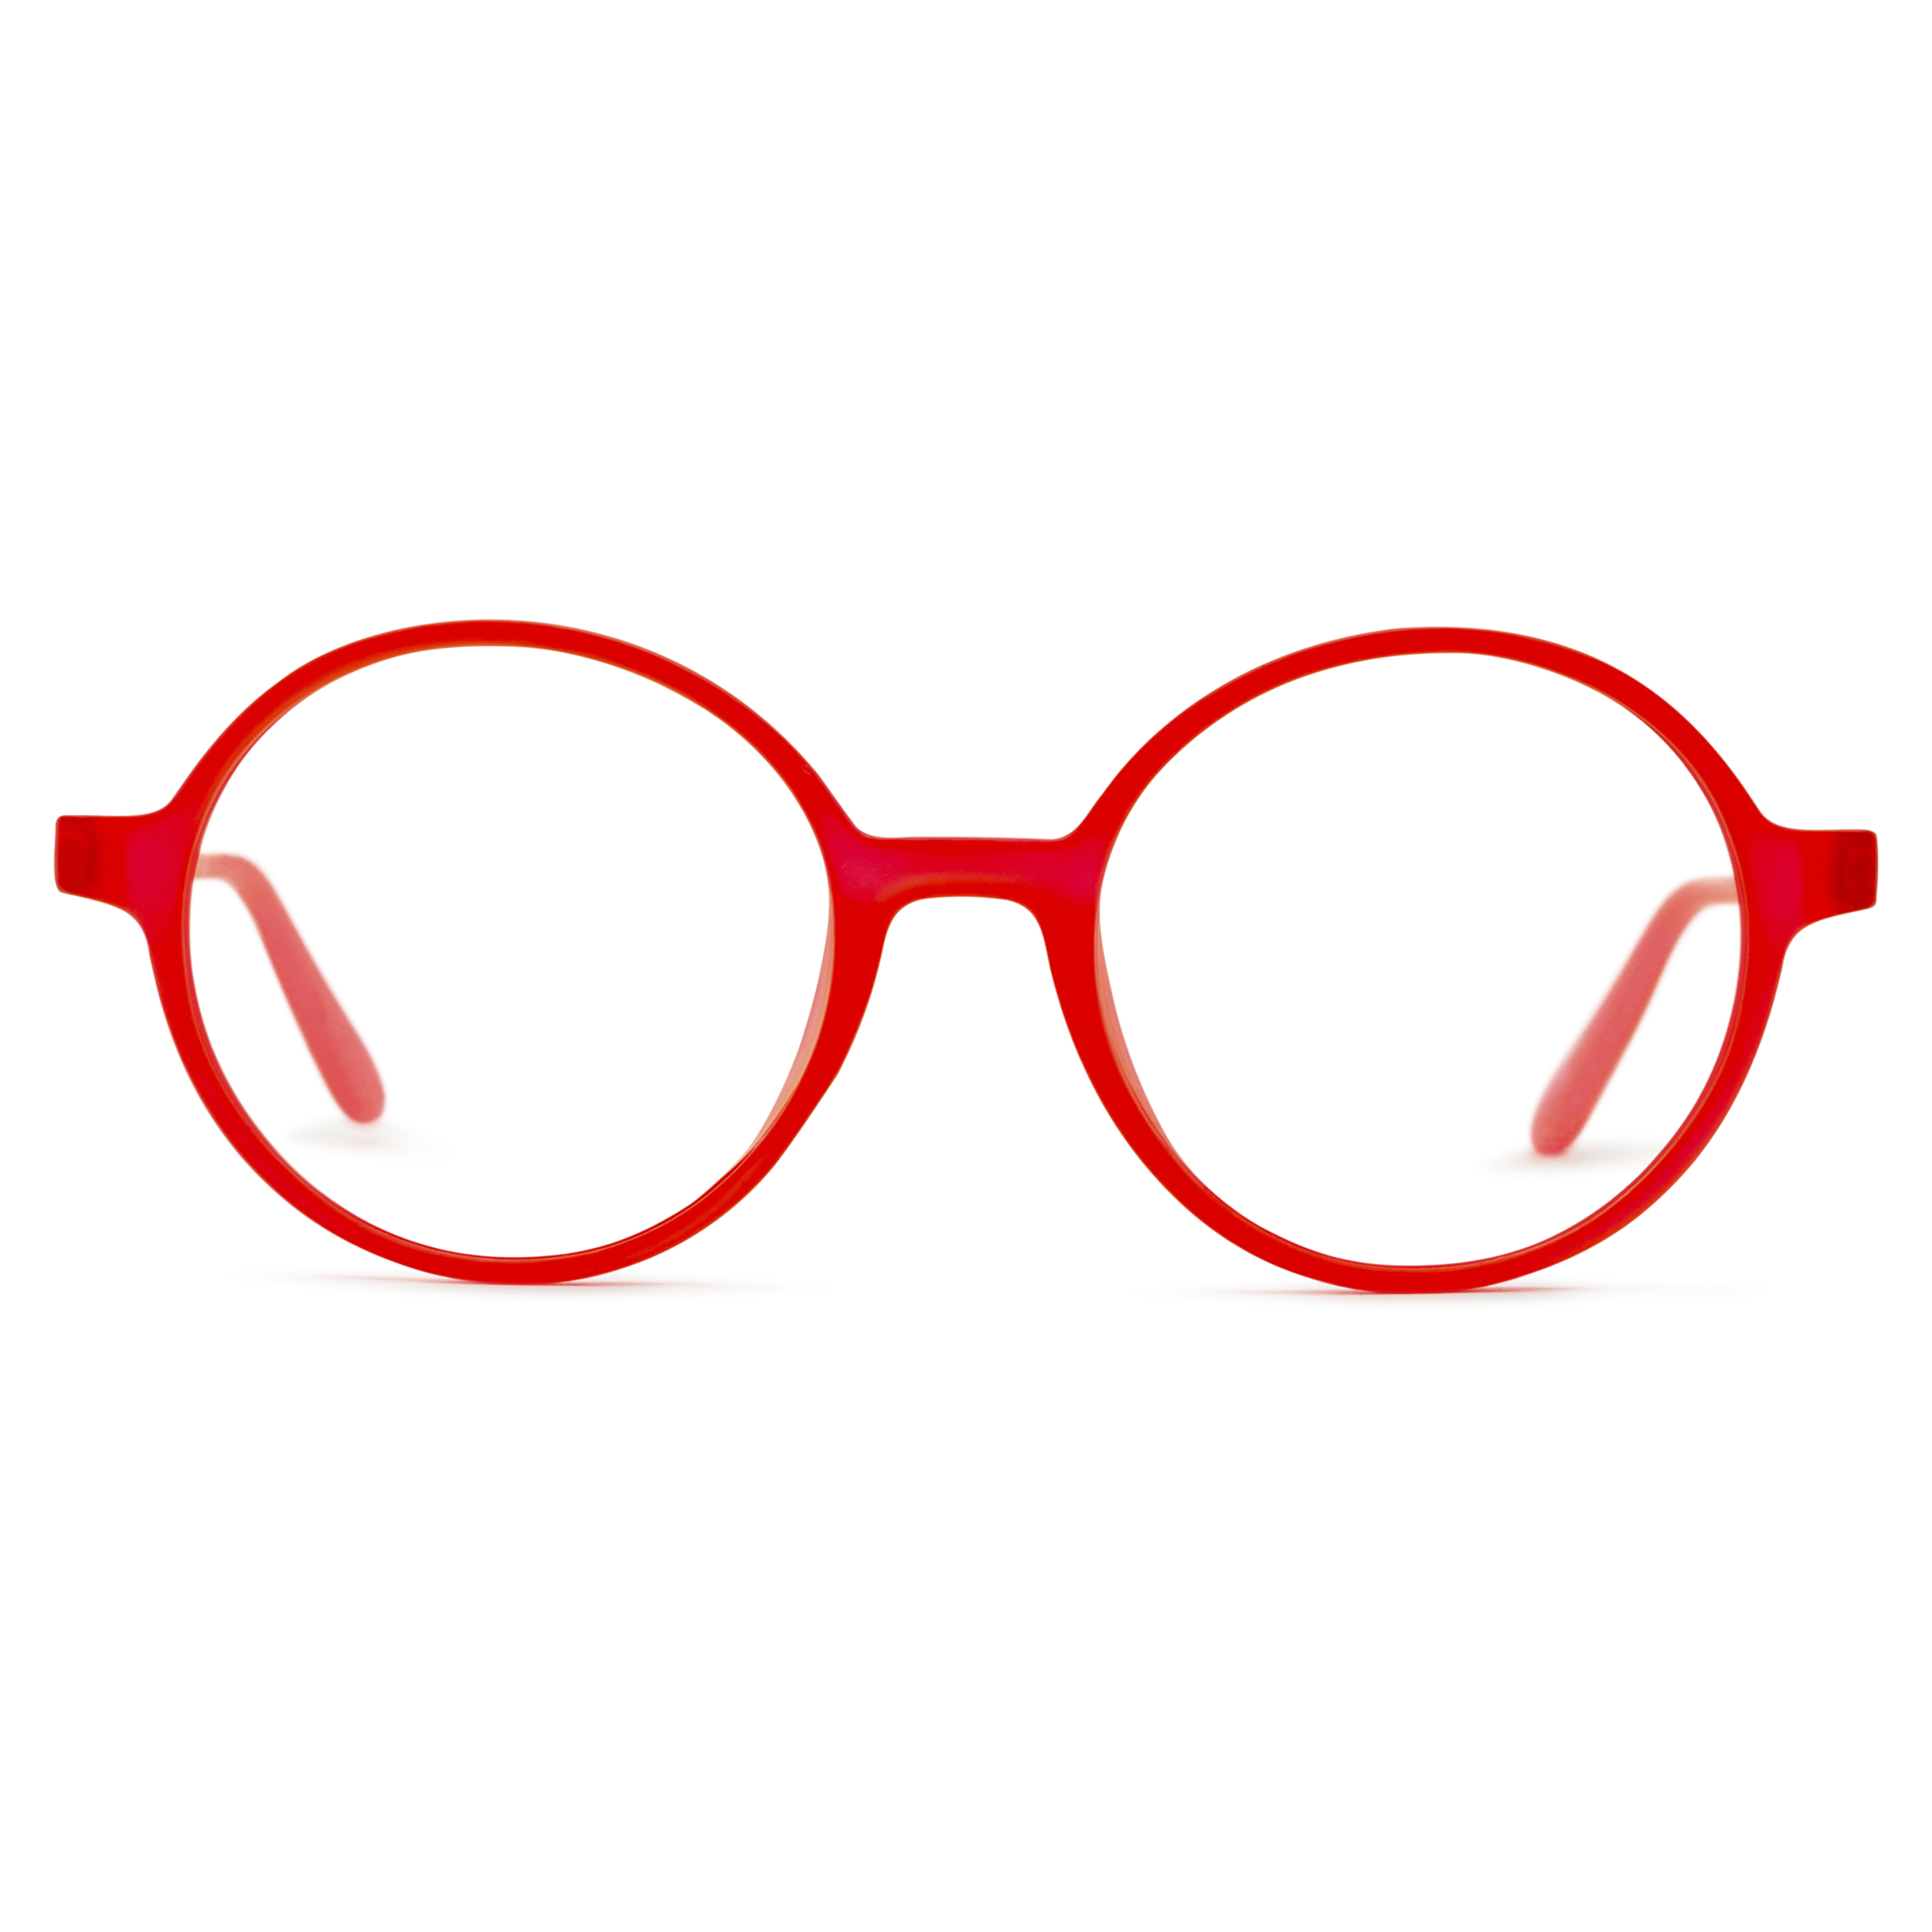 Women's Round Reading Glasses In Red By Foster Grant - Bartlett - +1.75